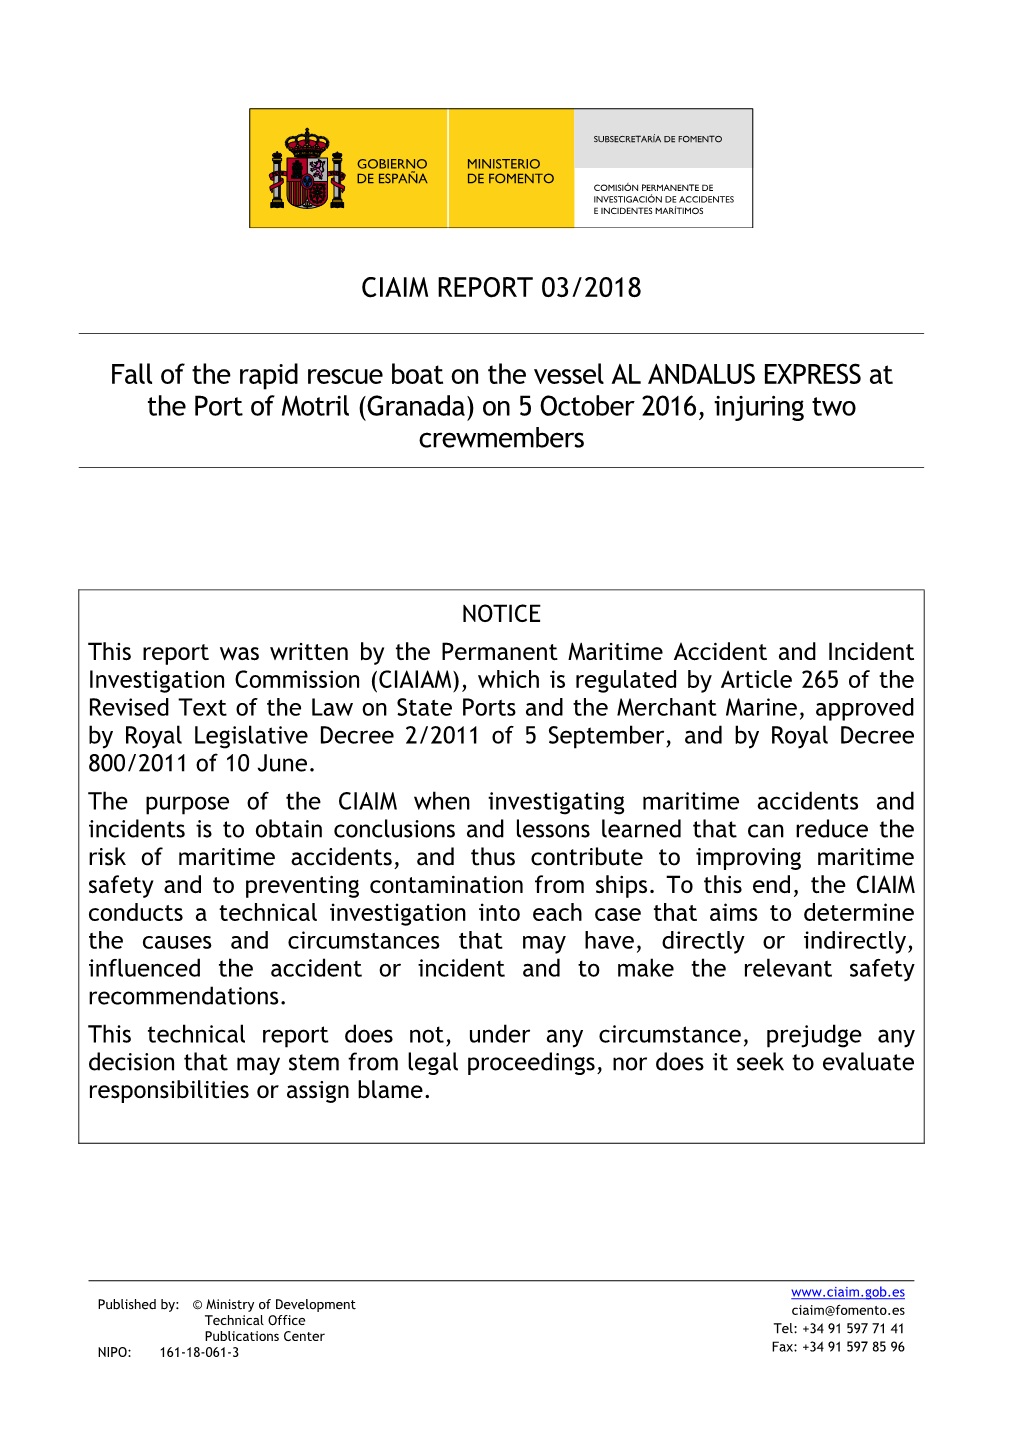 CIAIM REPORT 03/2018 Fall of the Rapid Rescue Boat on the Vessel AL ANDALUS EXPRESS at the Port of Motril (Granada) on 5 October 2016, Injuring Two Crewmembers